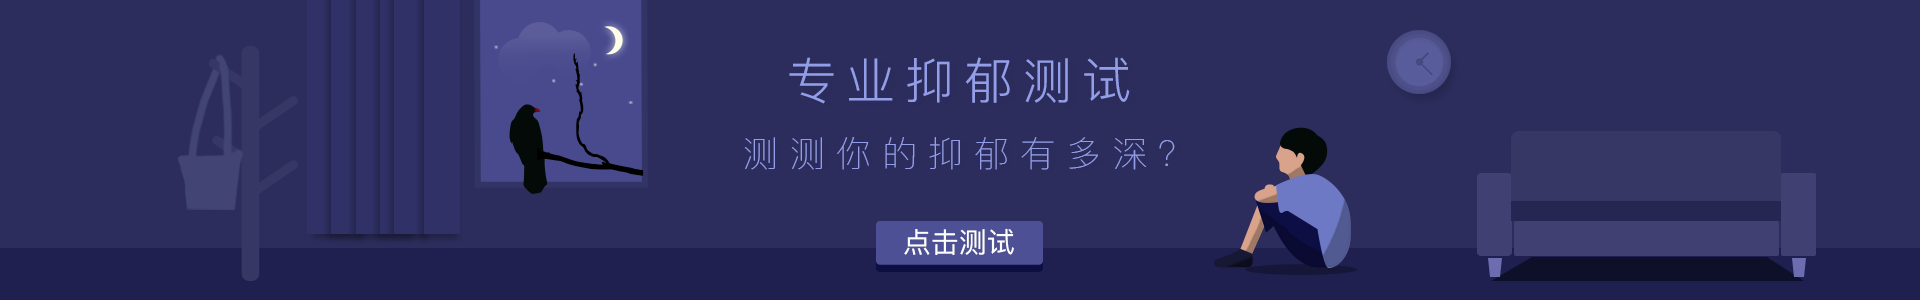 PC首页banner